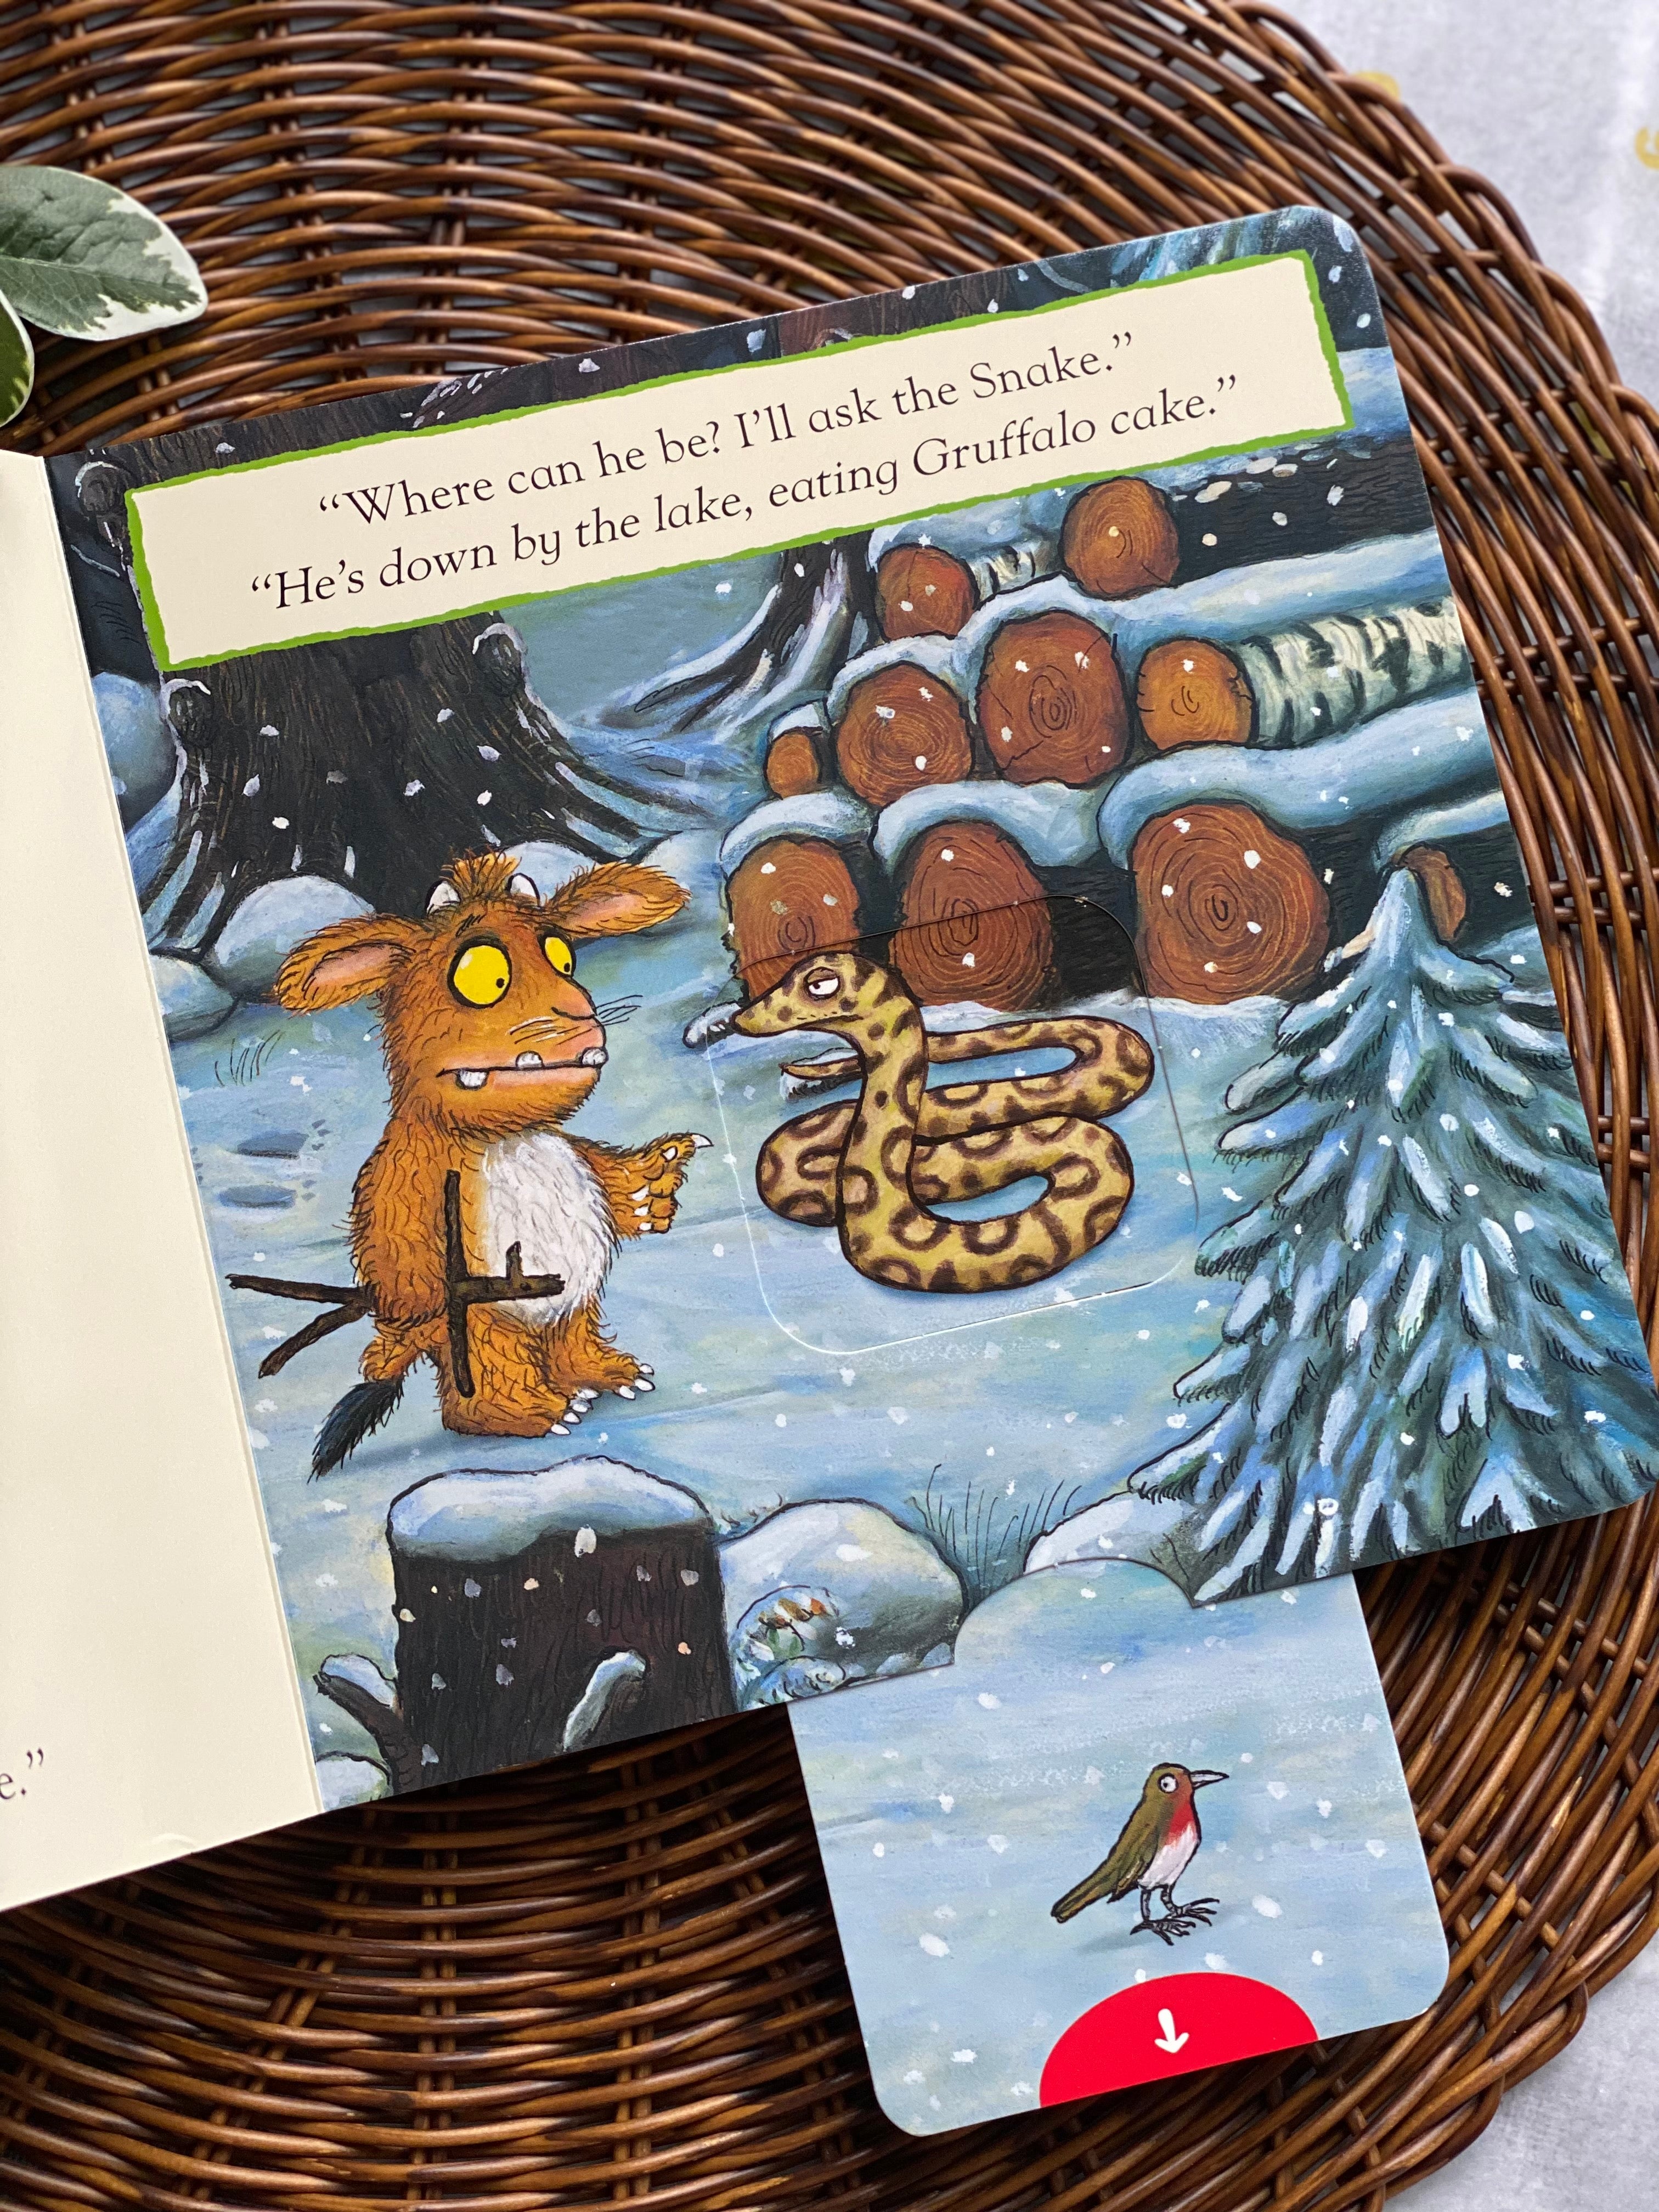 The GRUFFALO'S CHILD: A Push, Pull and Slide Book